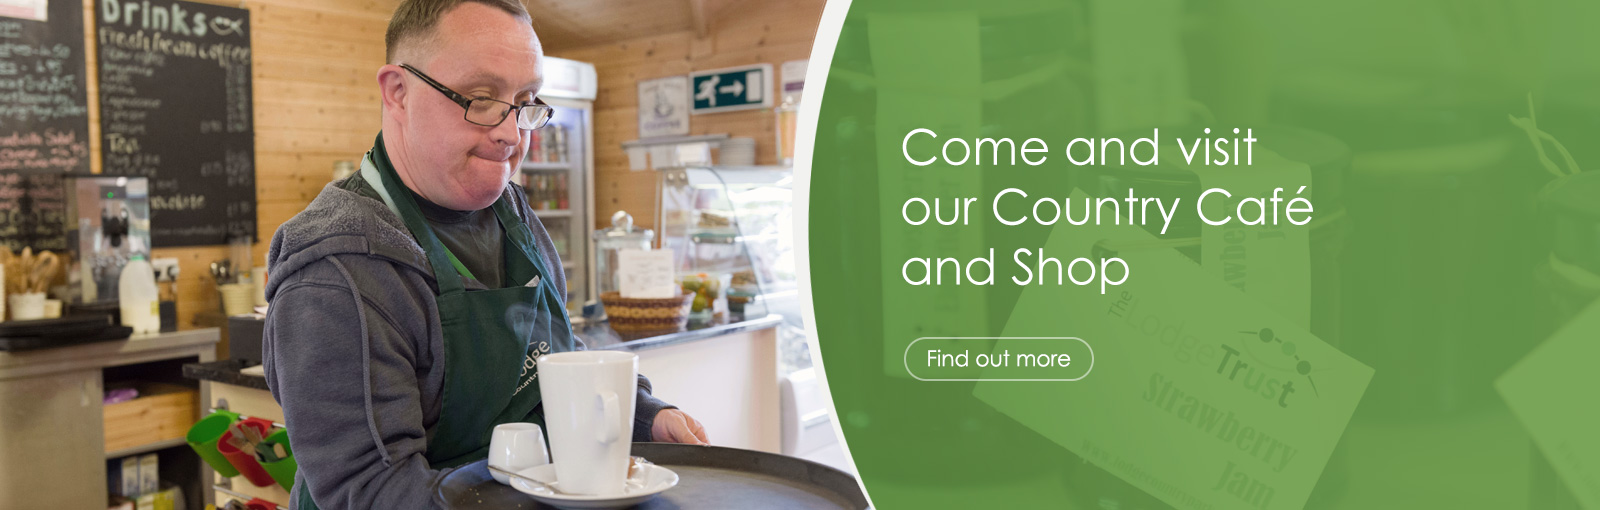 Come and visit our Country Café and Shop